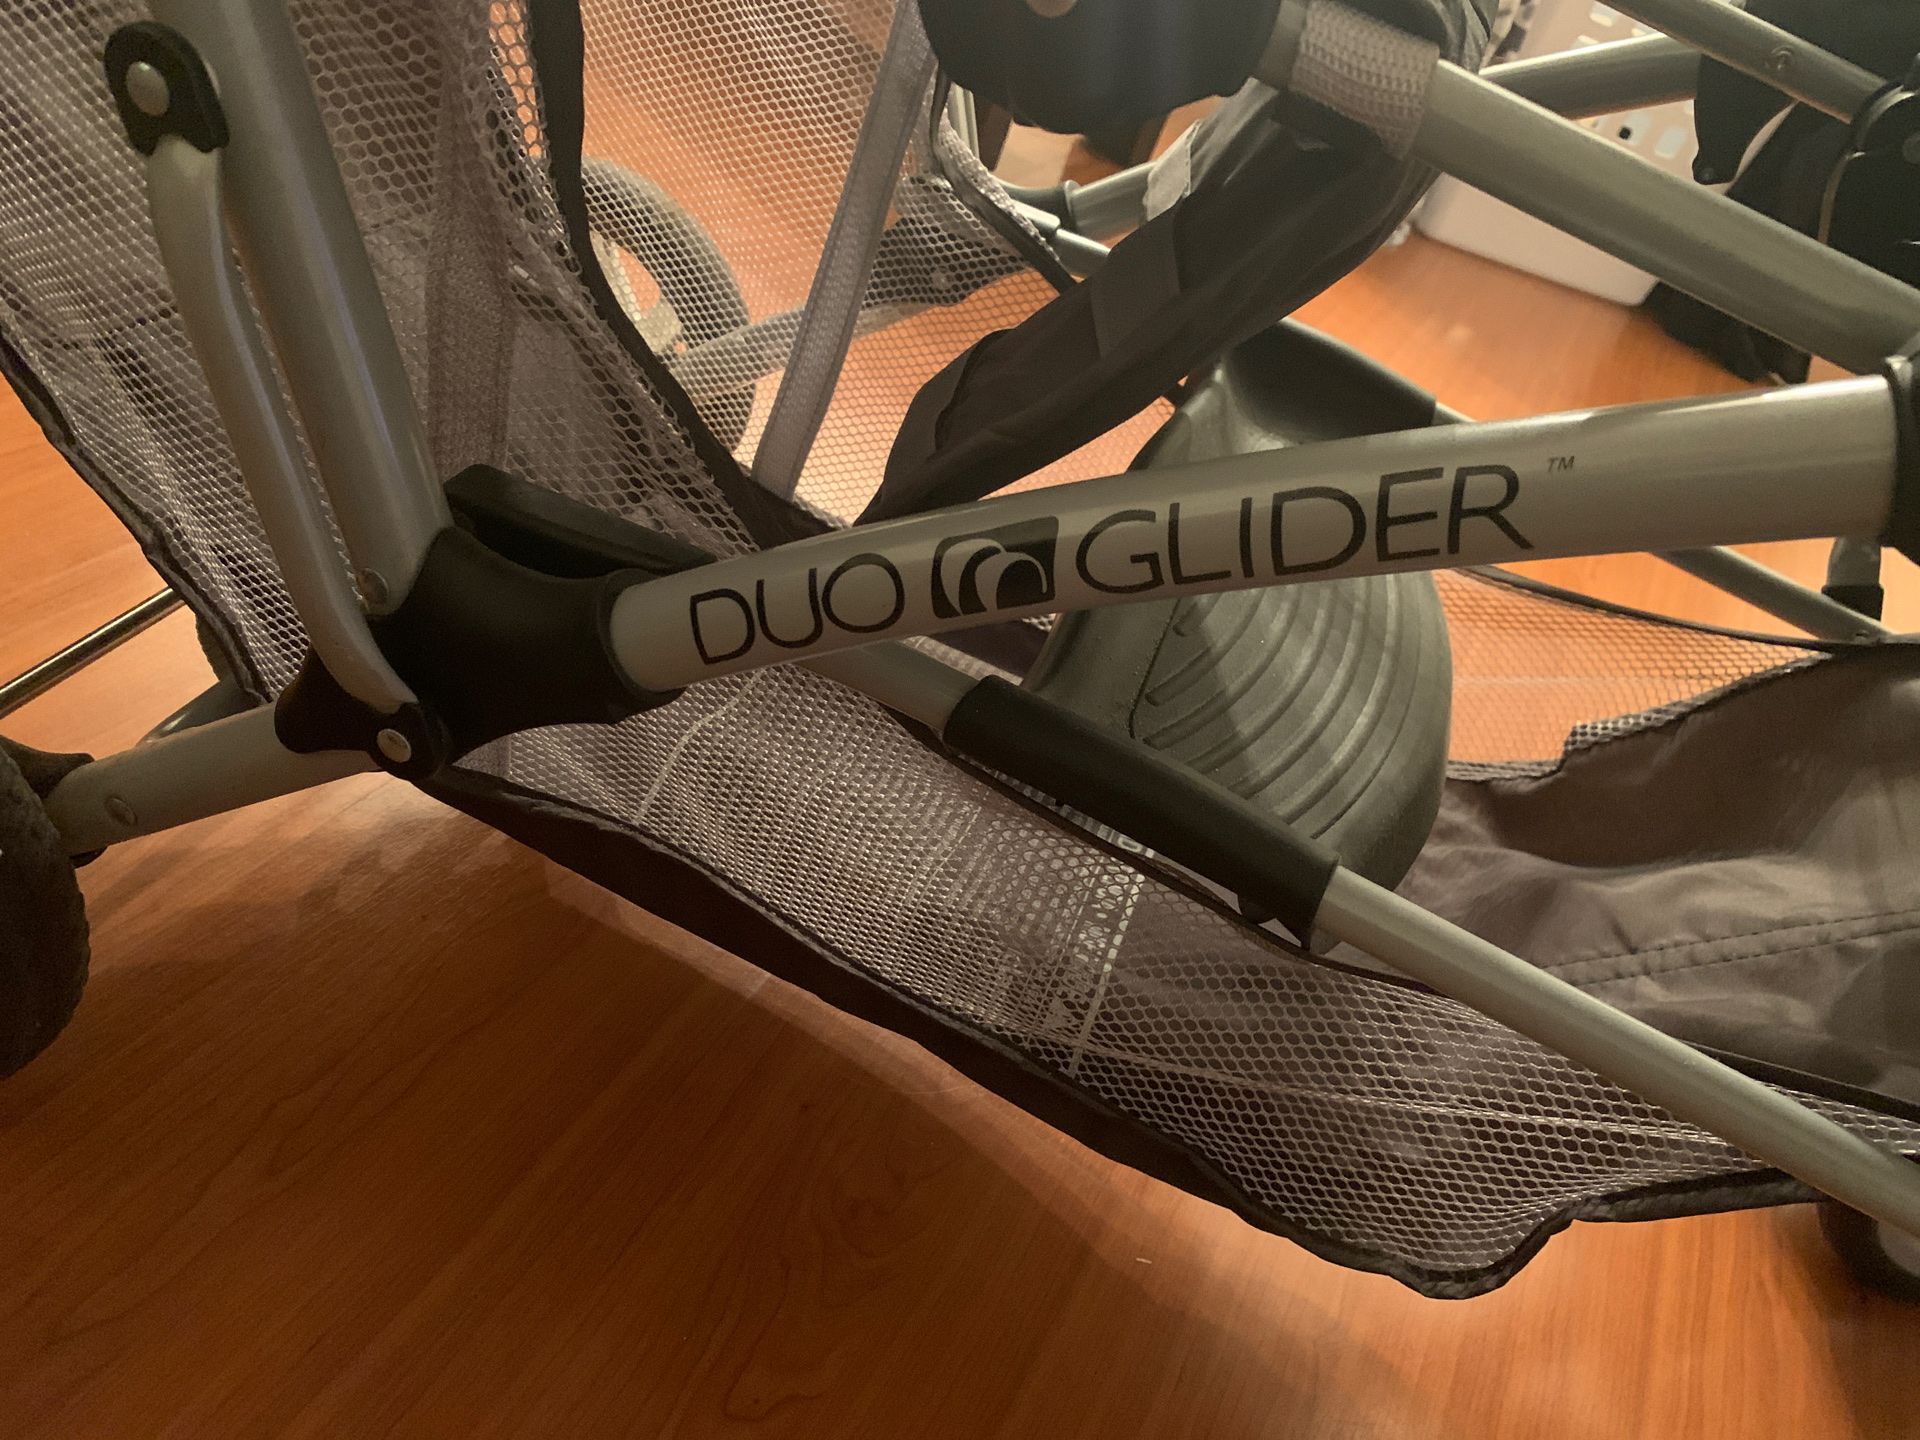 Graco Duo Glider Double stroller